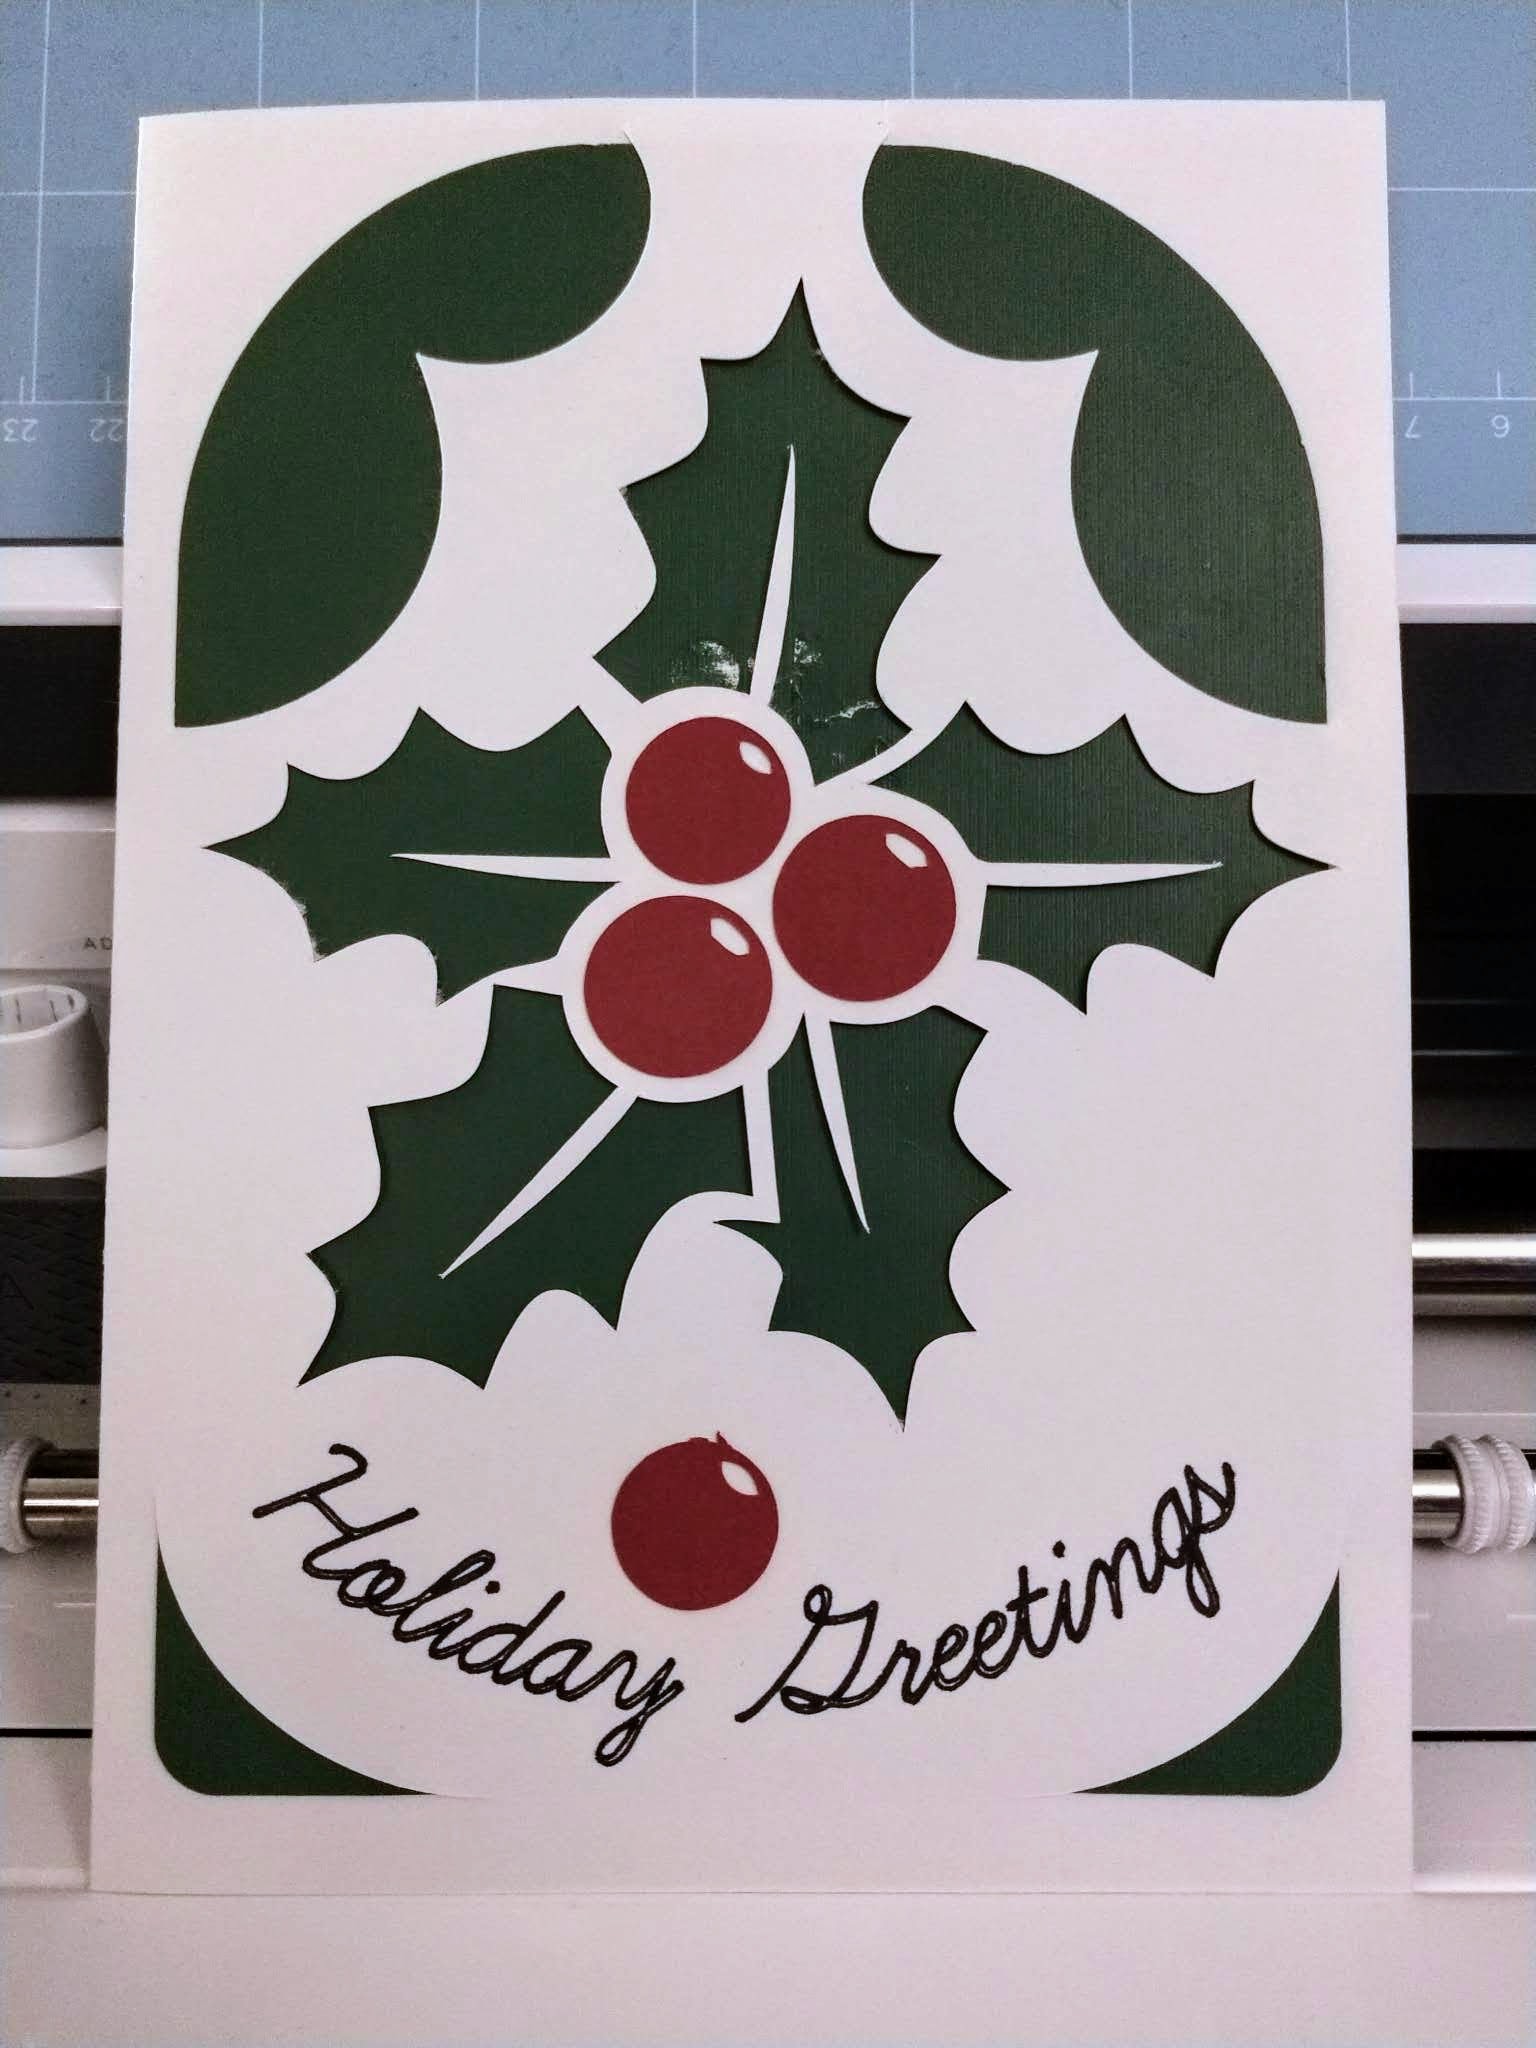 Stylized image of holly with red berries